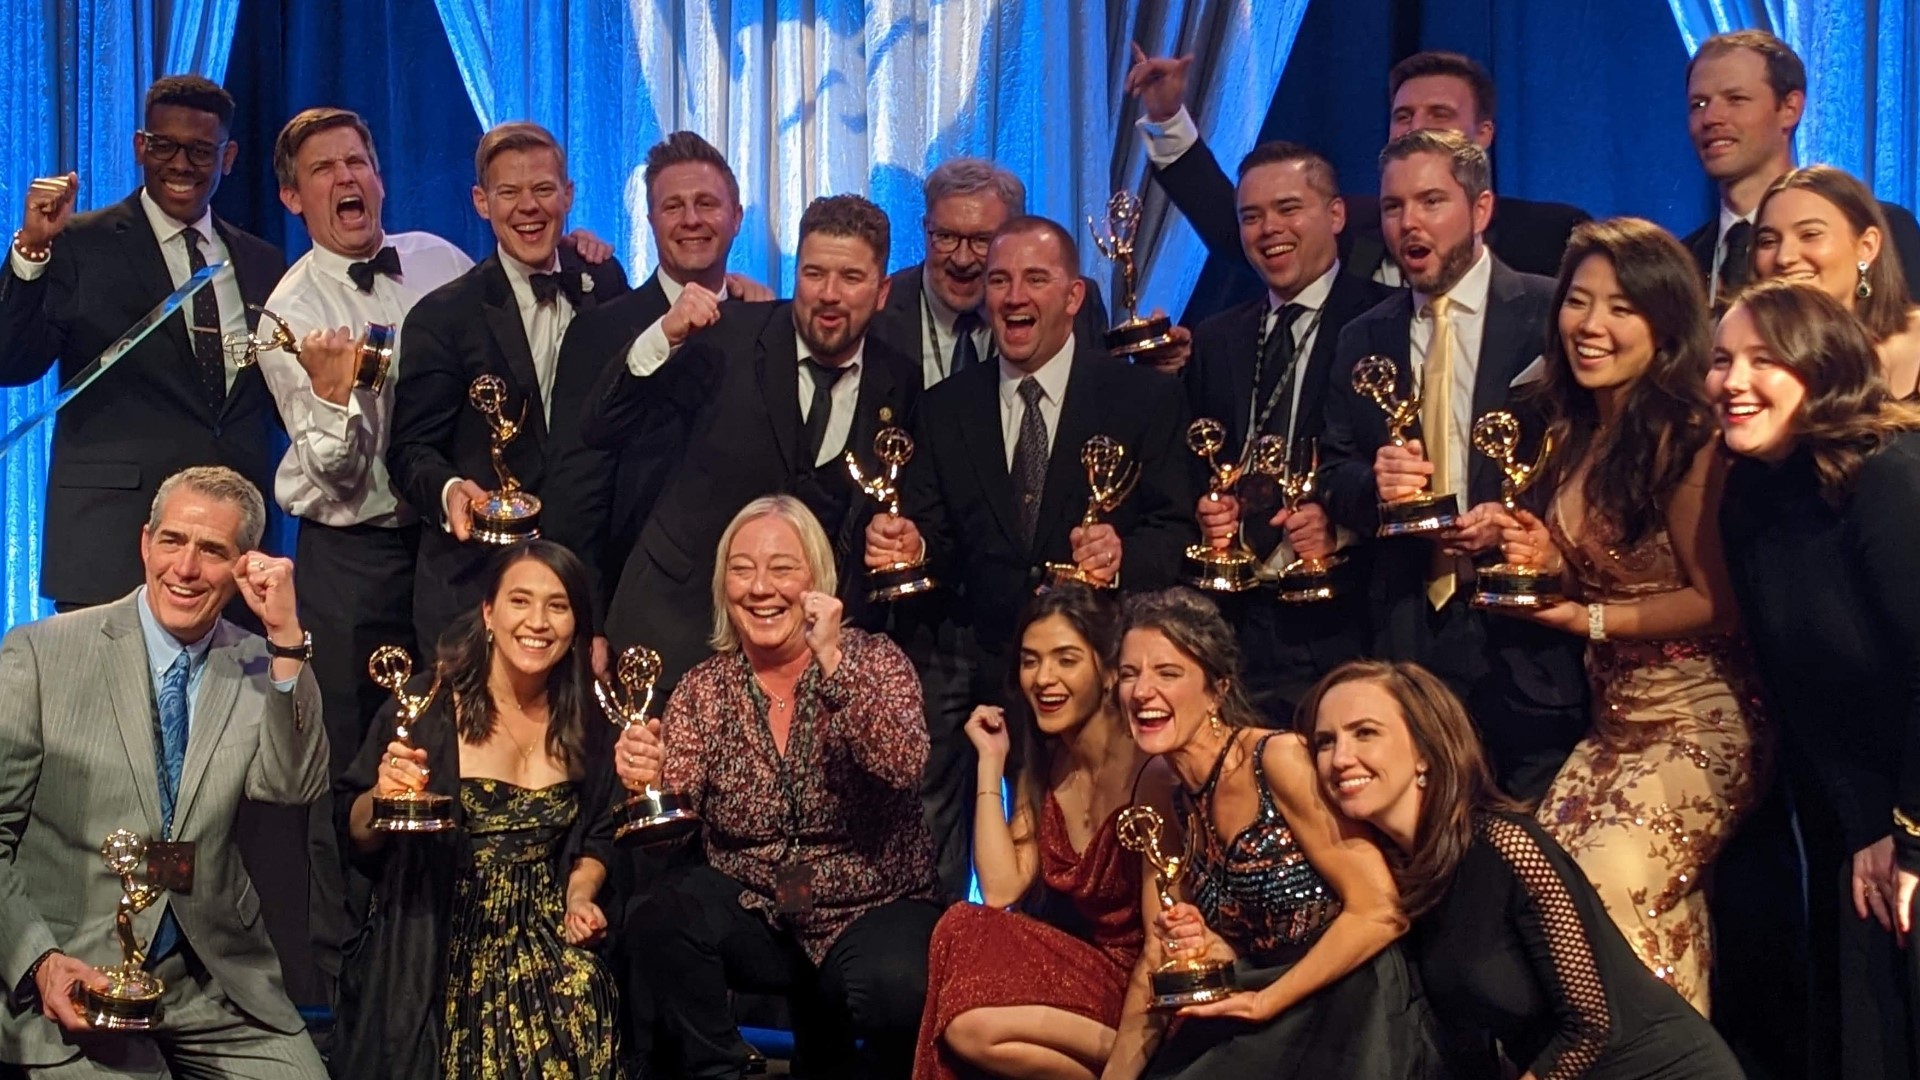 KARE 11 wins 27 awards at the Upper Midwest Regional Emmys